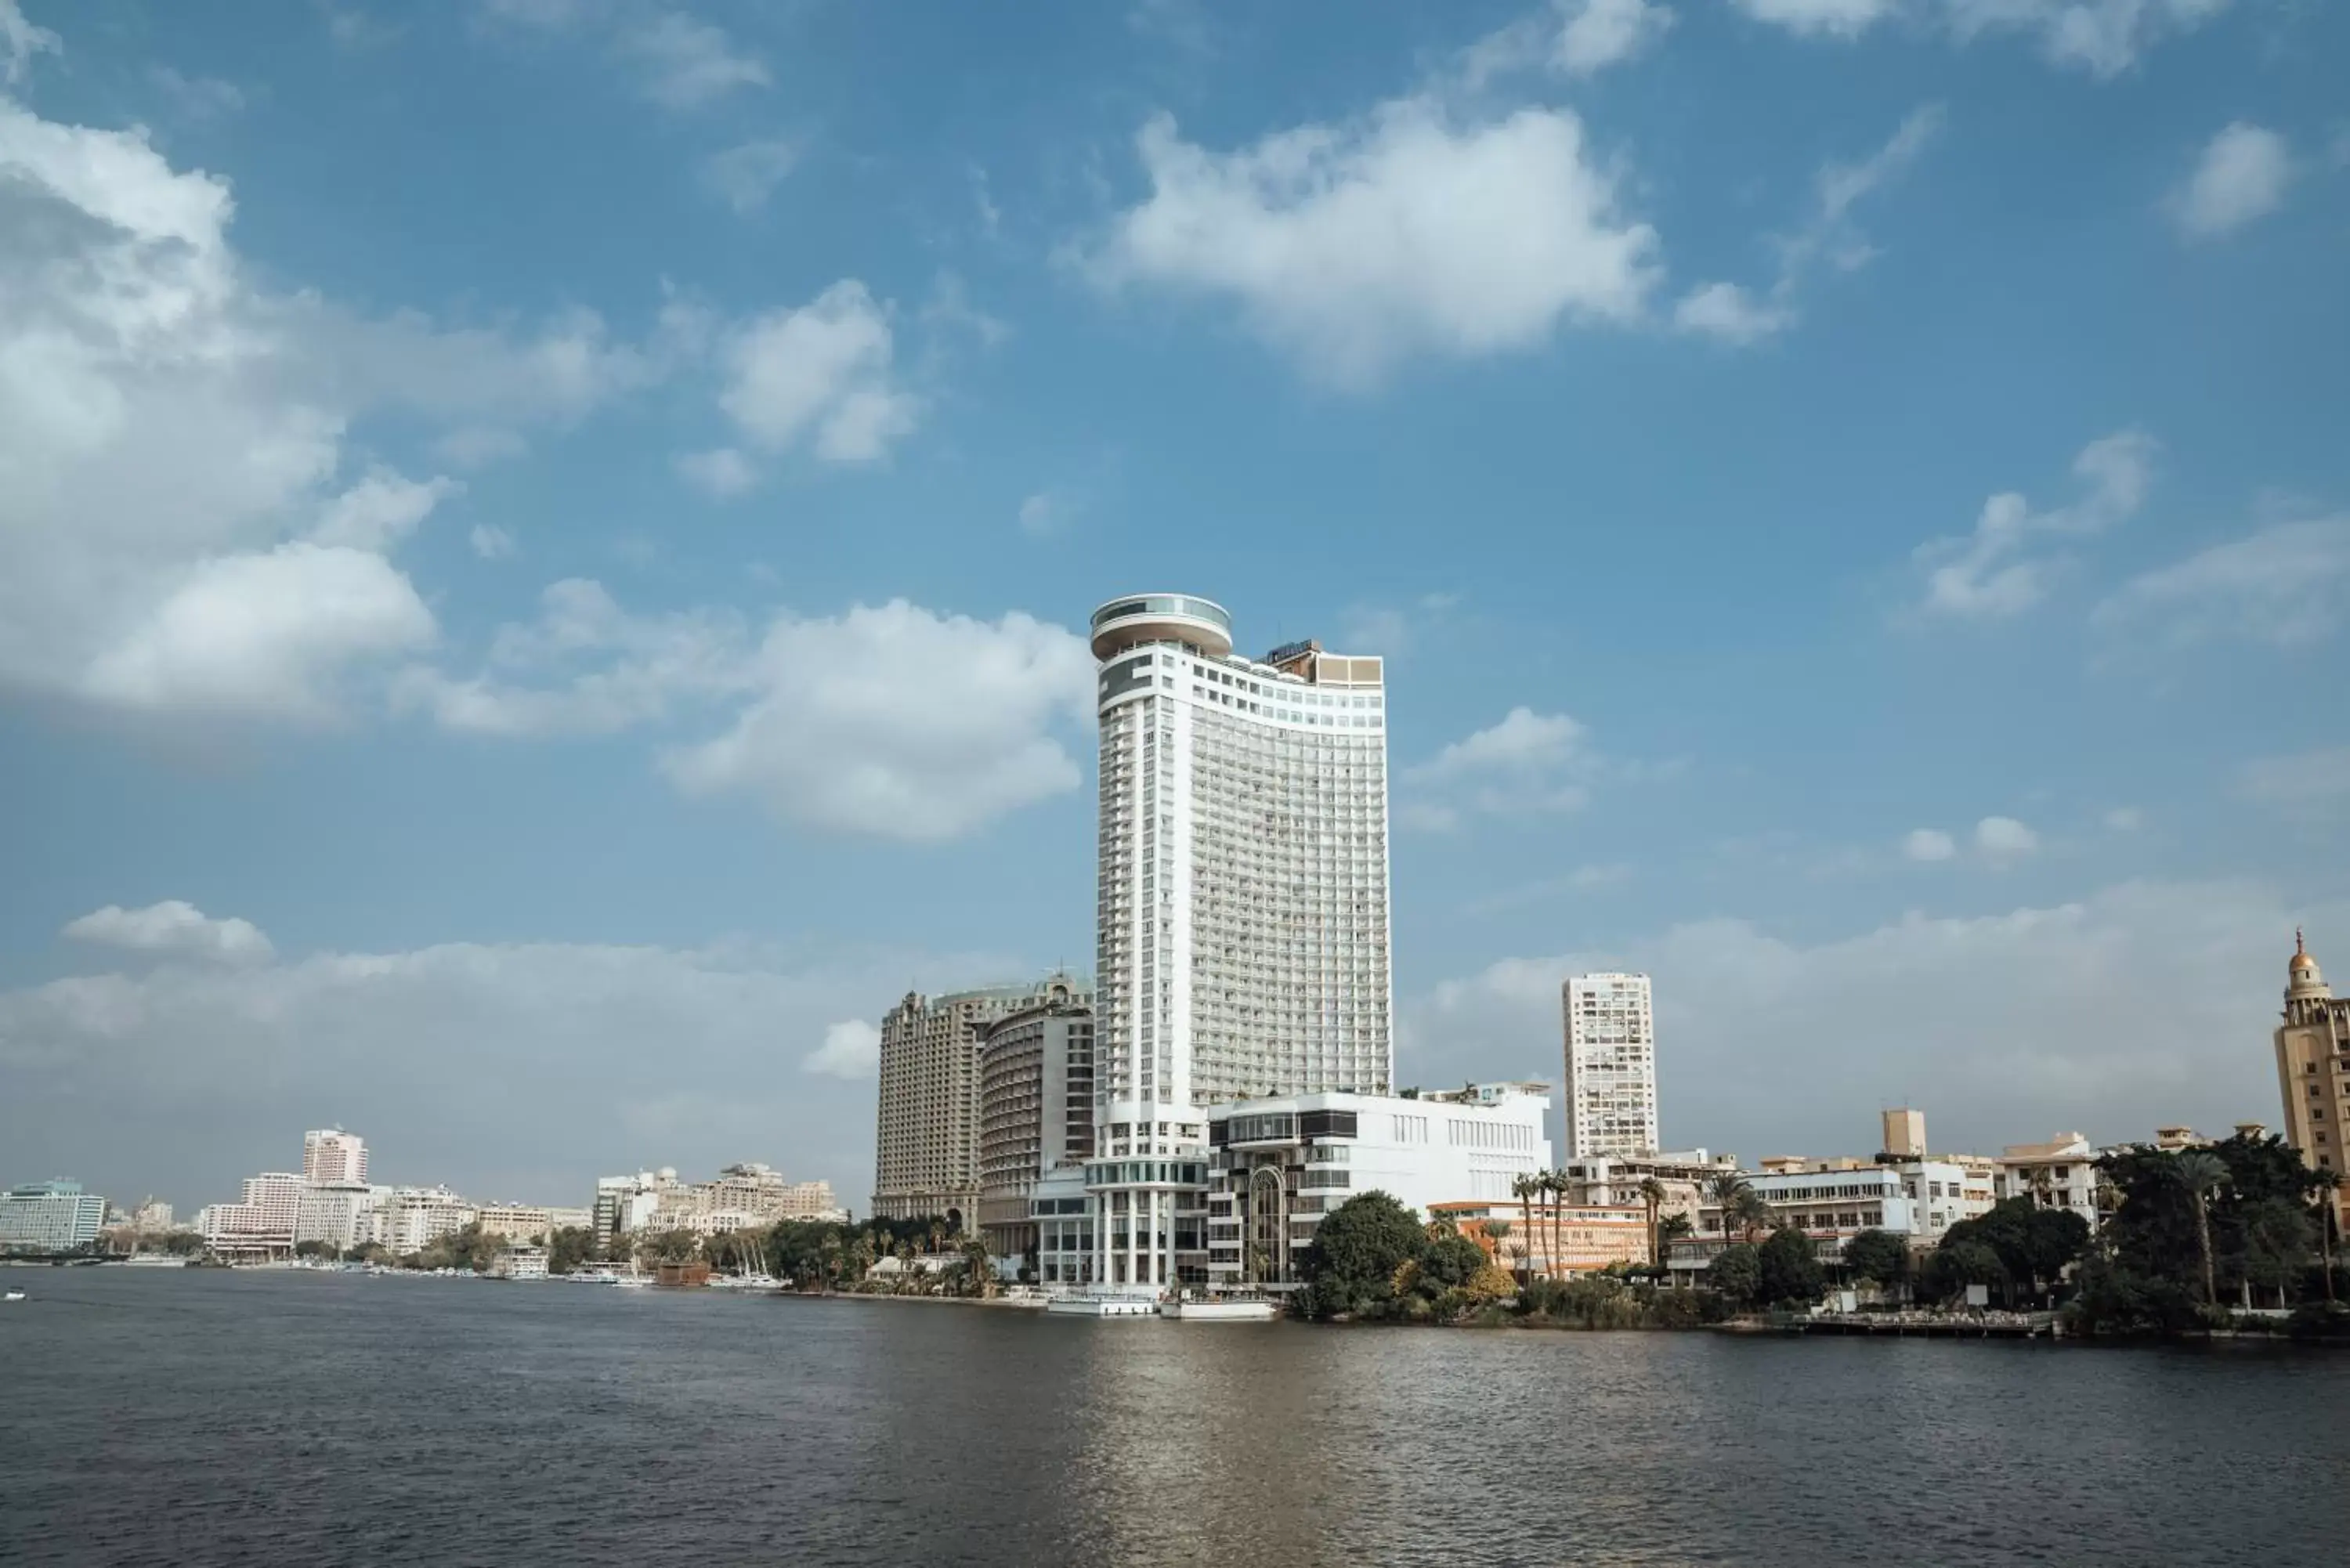 Text overlay in Grand Nile Tower